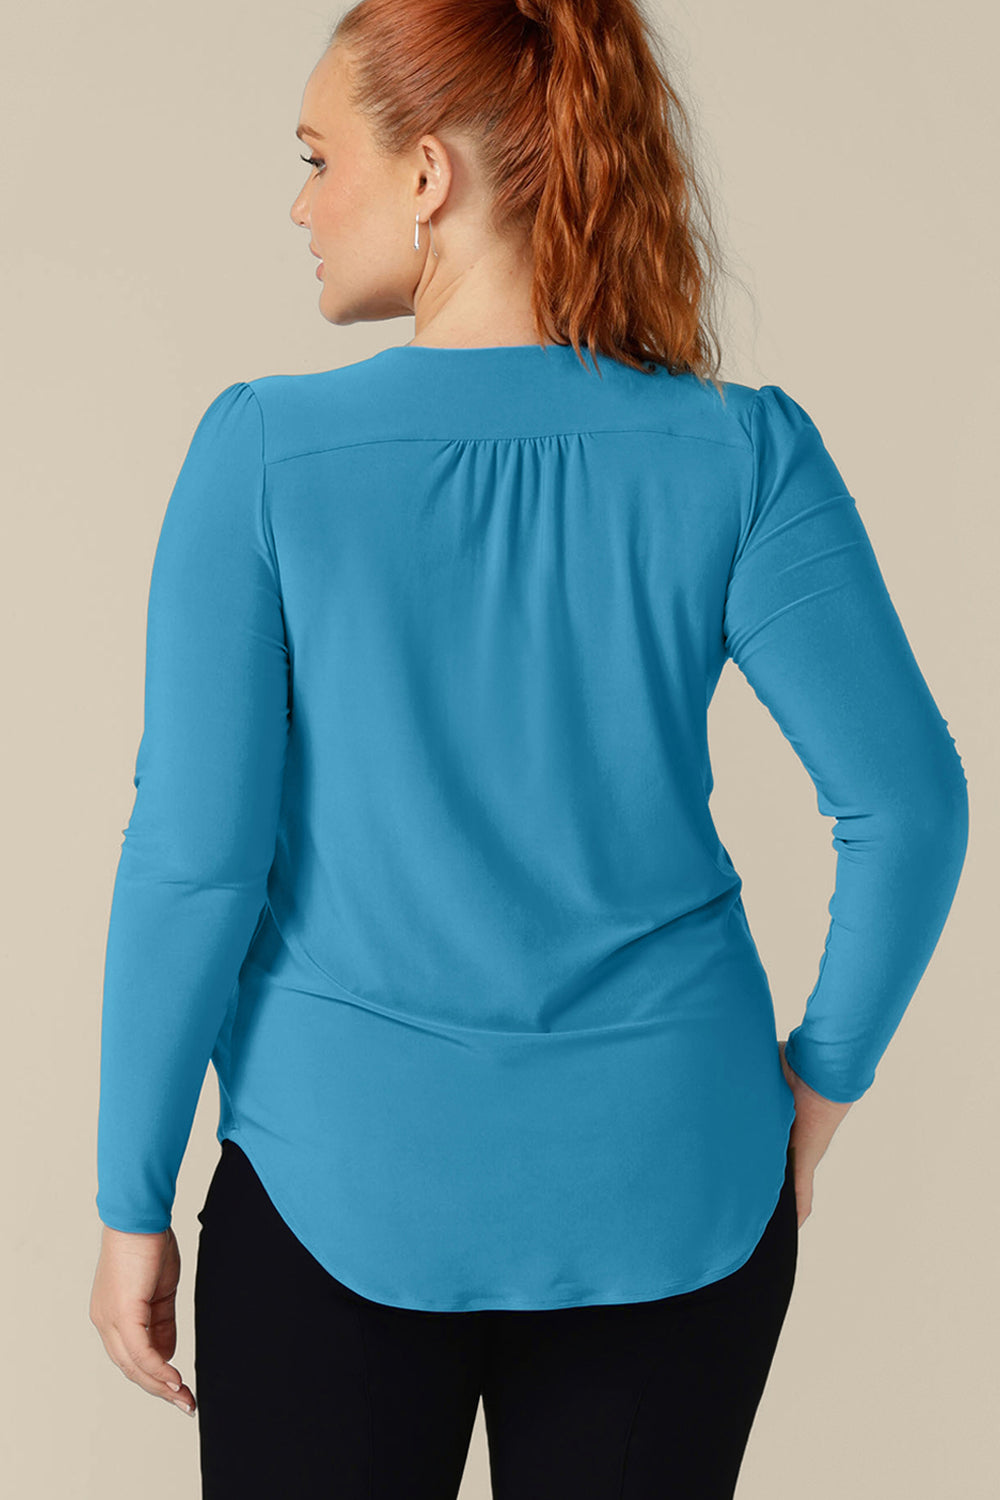 Back view of a size 12, curvy woman wearing a long sleeve, V-neck top in Opal blue jersey. Made in Australia by Australian and New Zealand women's clothing company, L&F, shop tops in inclusive sizes, 8 to 24 with free shipping to New Zealand. 